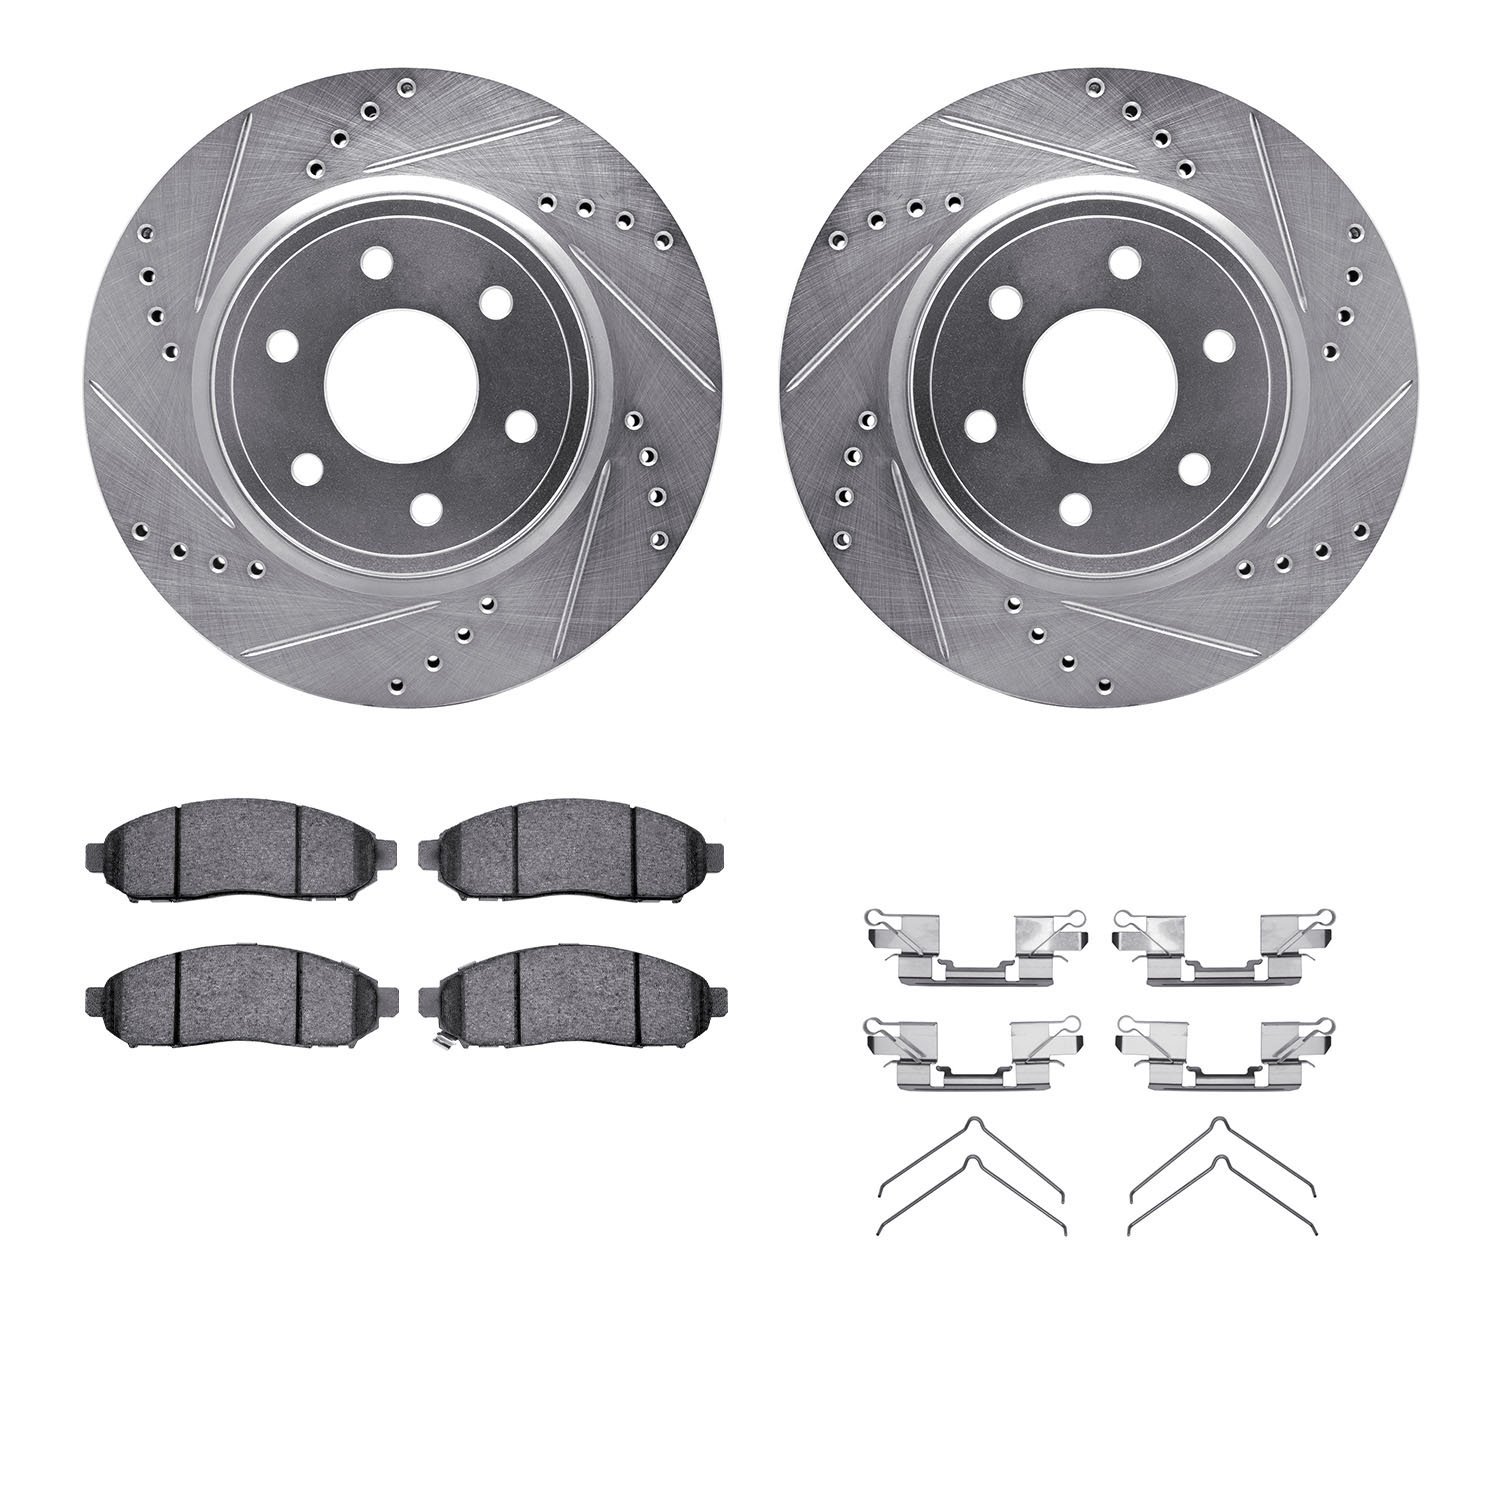 7312-67107 Drilled/Slotted Brake Rotor with 3000-Series Ceramic Brake Pads Kit & Hardware [Silver], Fits Select Multiple Makes/M